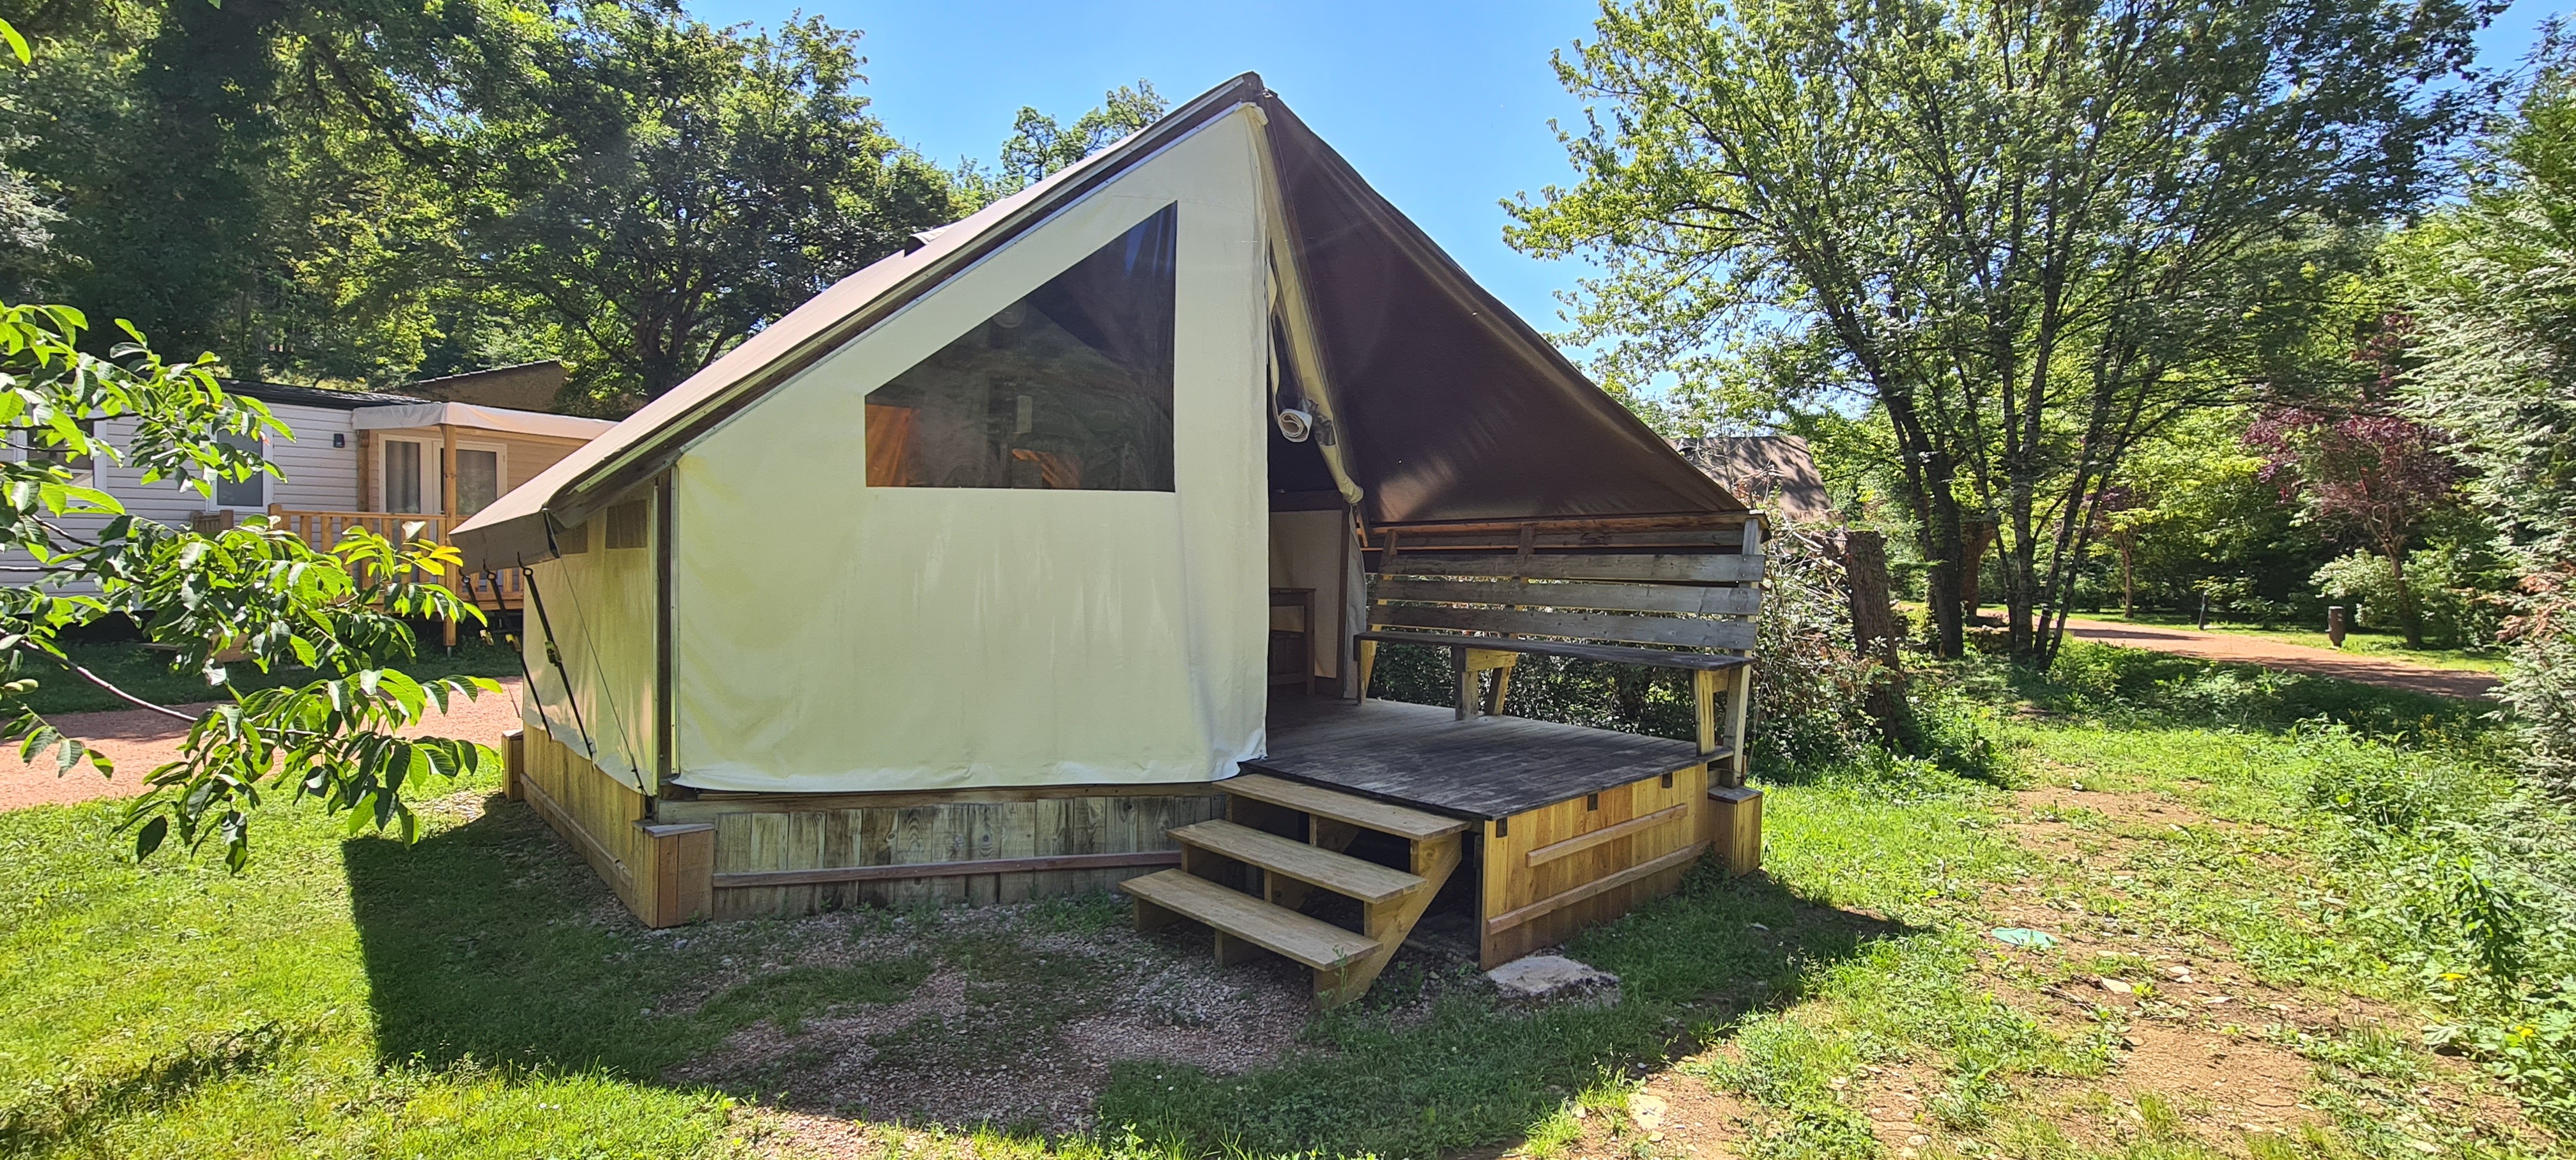 Canvas Lodges Style Junior 17 M², 2 Br, Without Bth Nor Tv